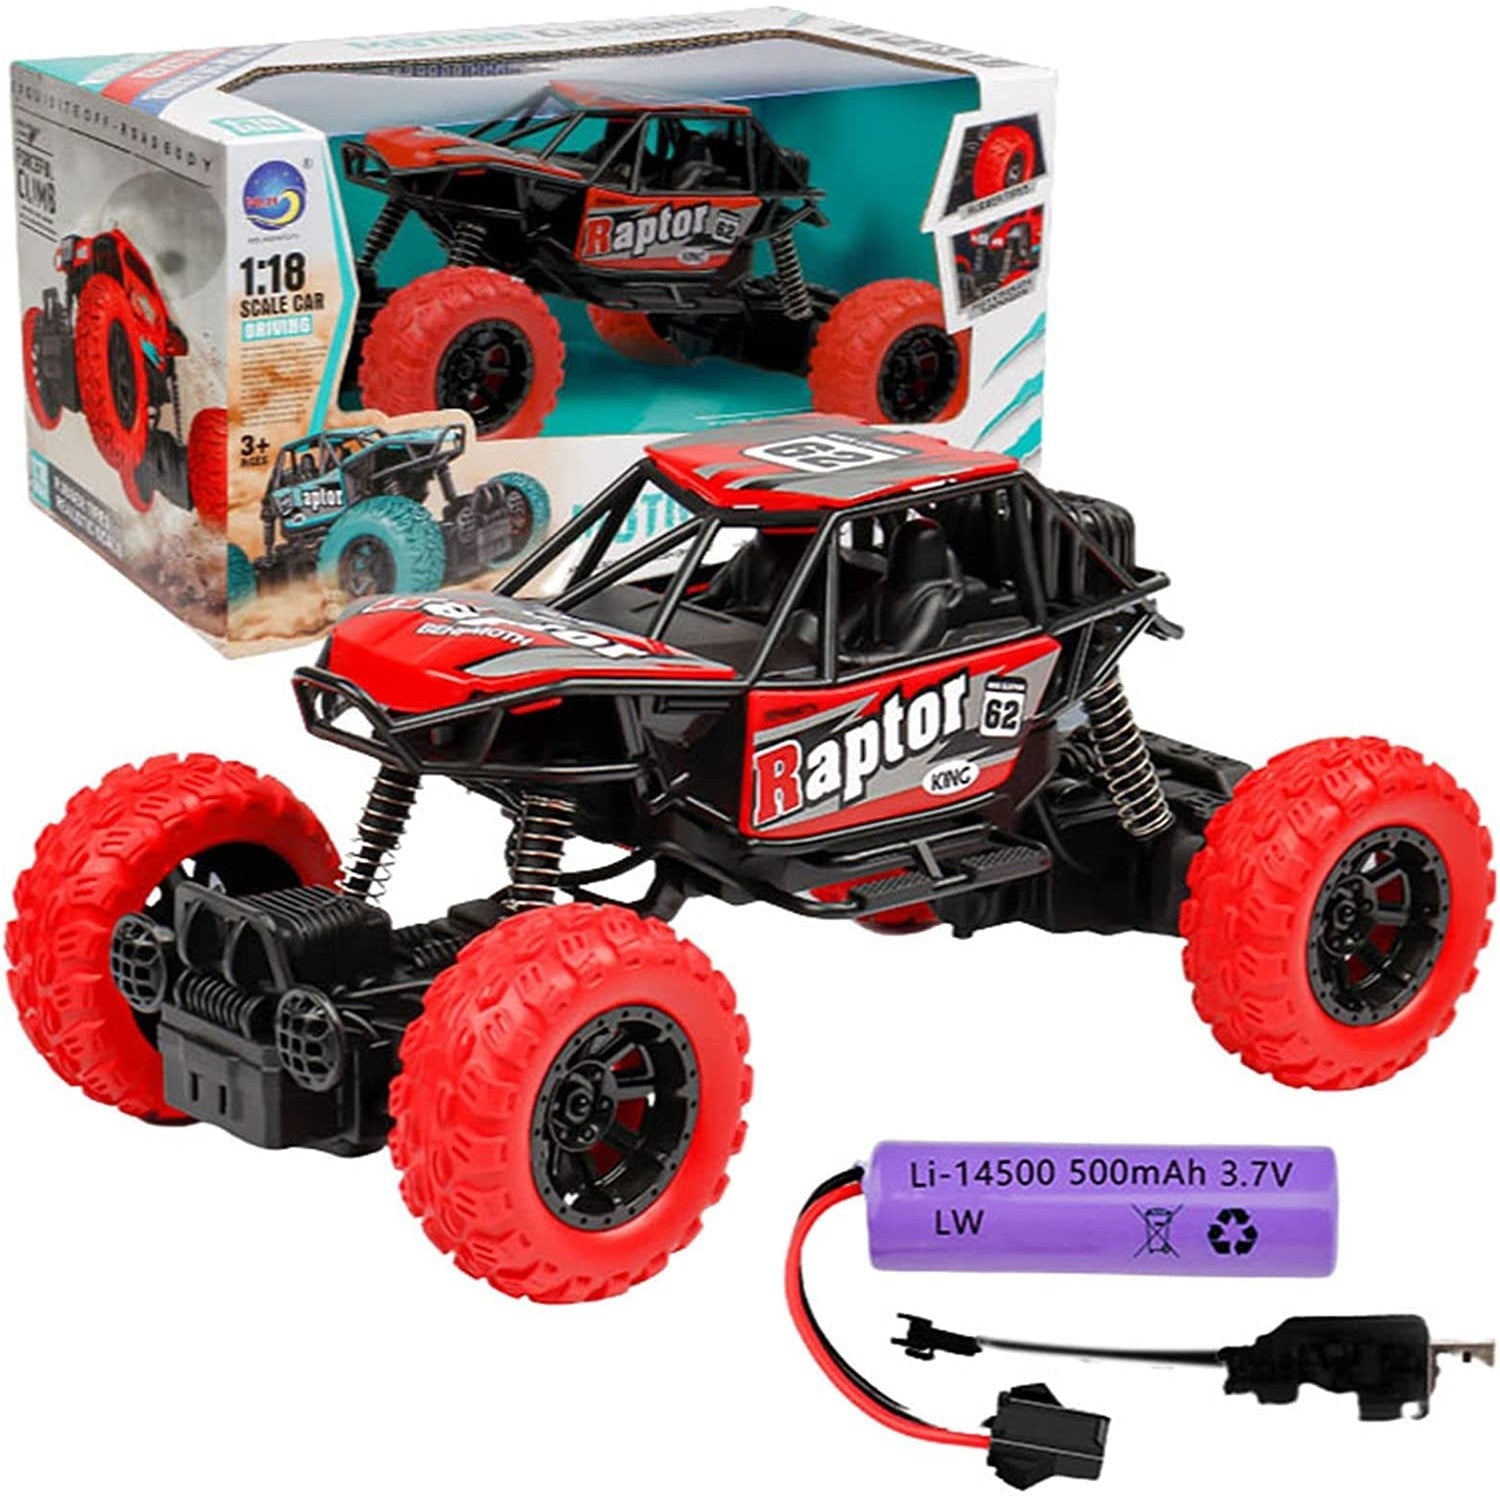 Remote Control Raptor Monster Truck 1:18 Scale Motion Climbing Cross Country RC Toy Car Tristar